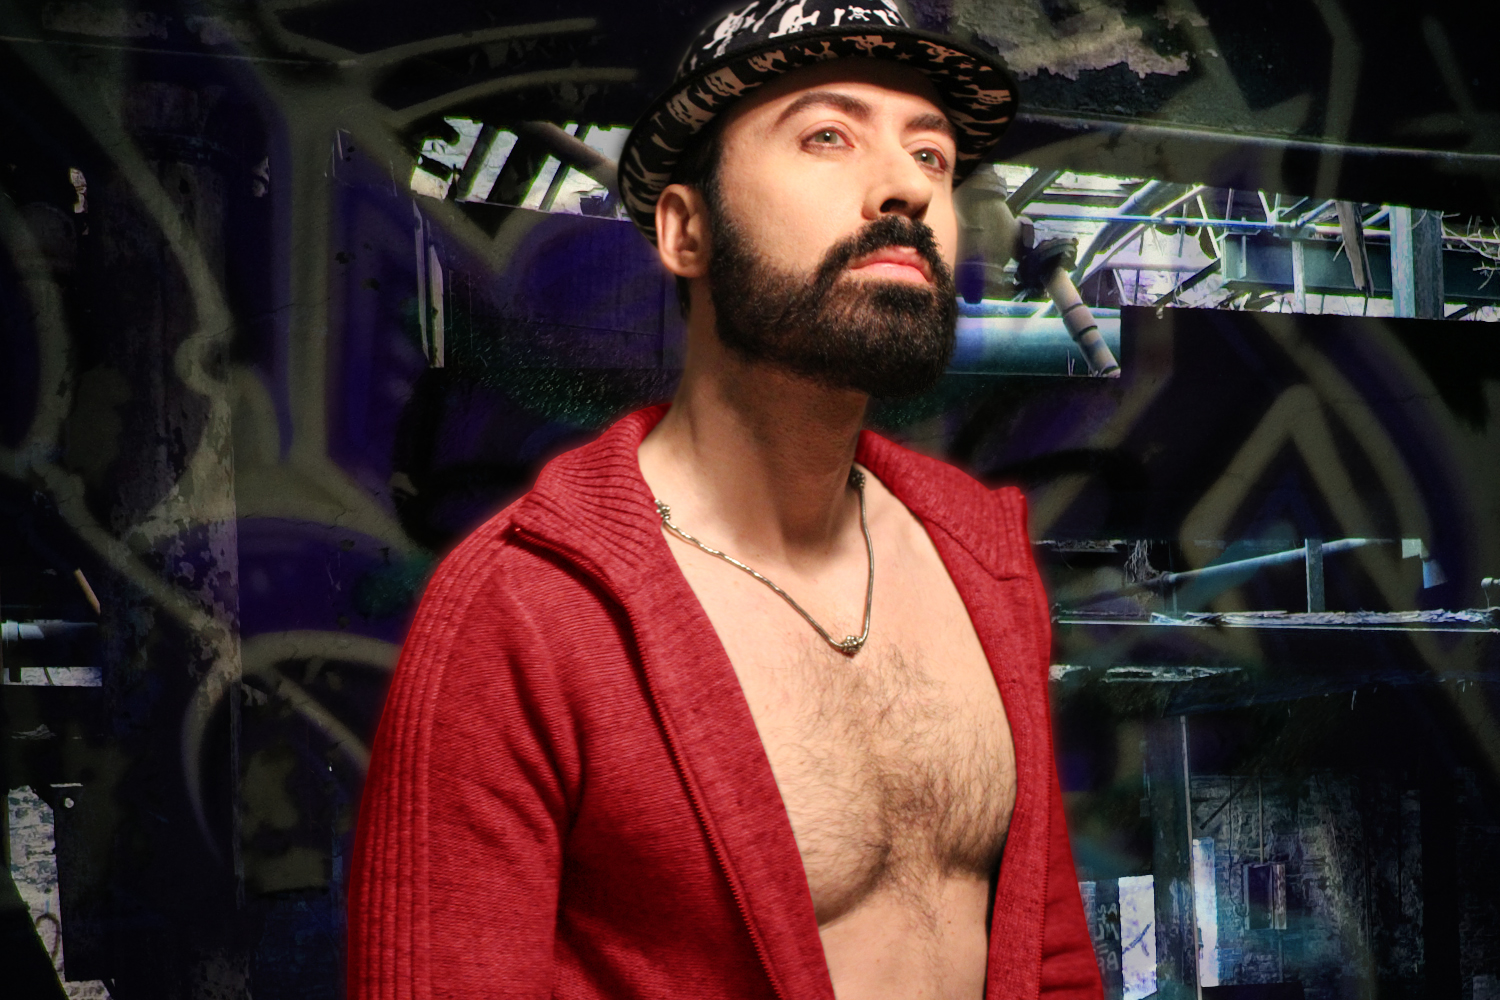 In this decaying world of corruption, the 1 thing I never want to lose is #Hope #JusticeForAll #ComingIn2015 #NewSeason #Beard #MoonDazeTV #LifeIsGood